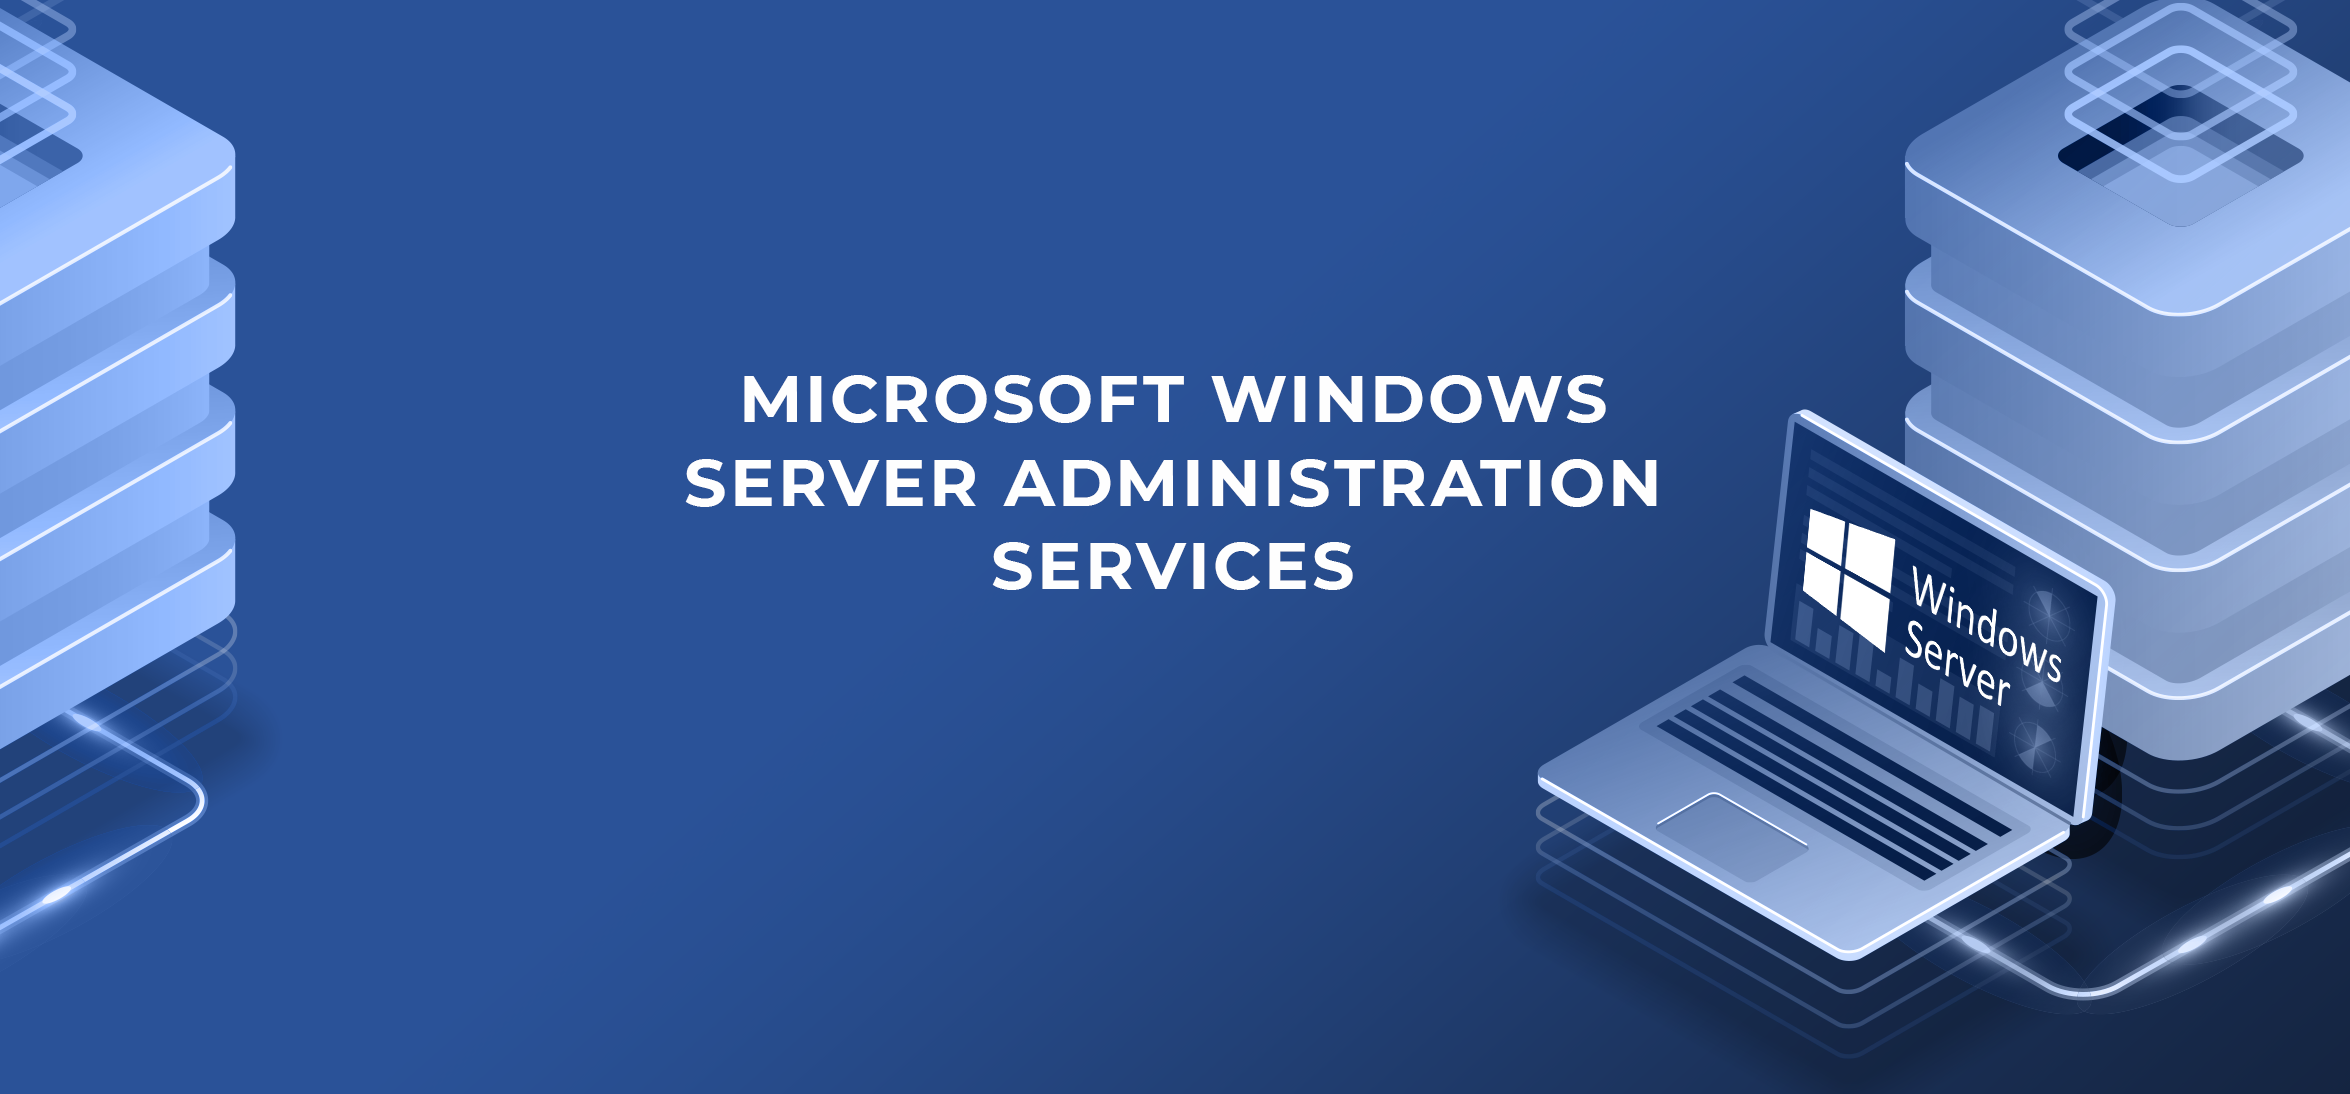 Effective Windows Server Administration and Support Solution Provider in Dulzura CA, 91917